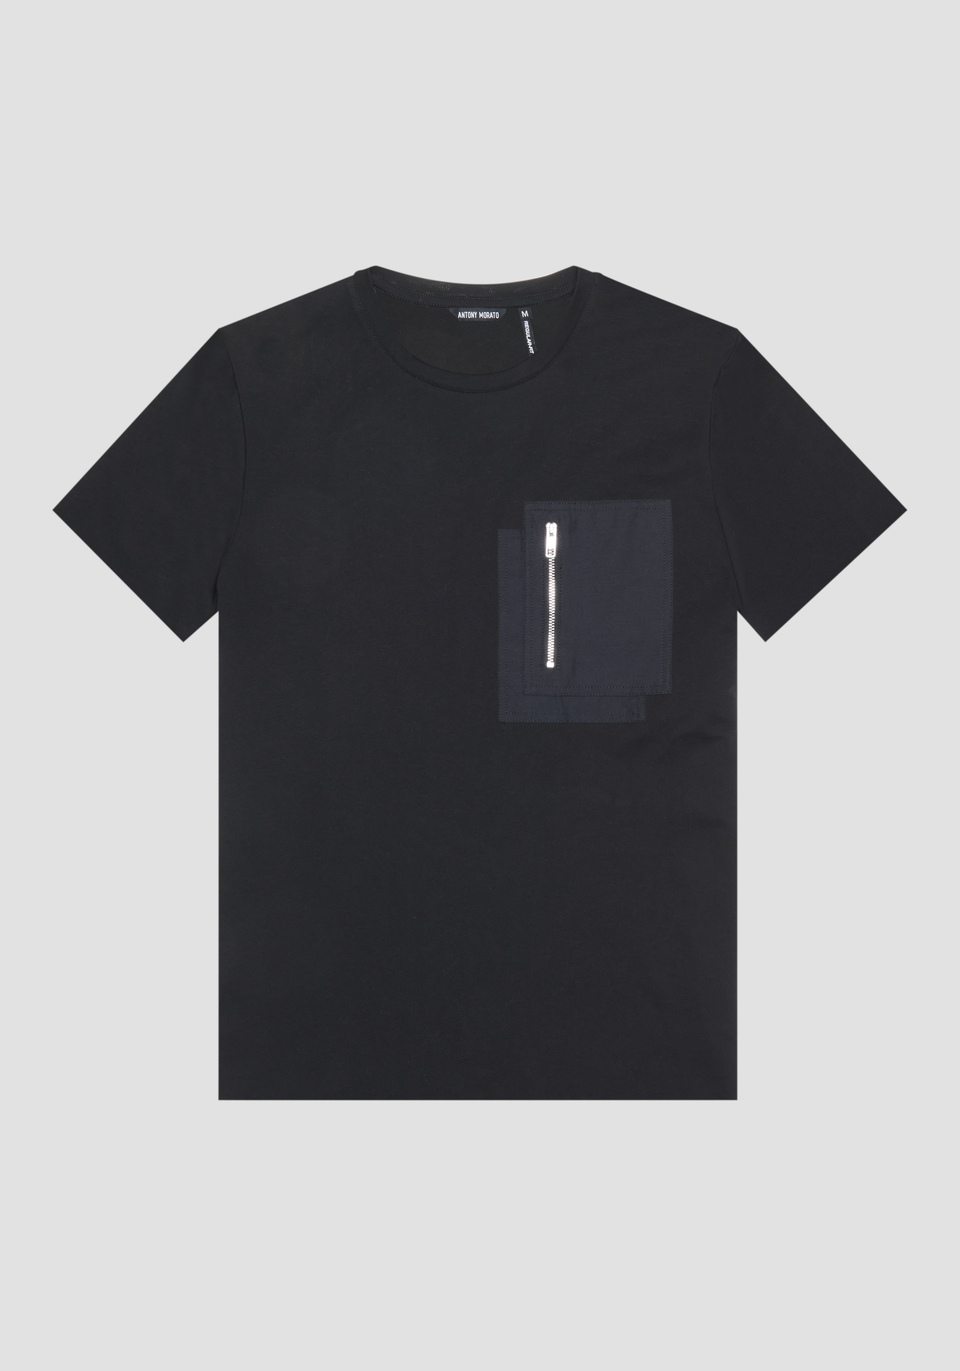 REGULAR FIT T-SHIRT IN COTTON WITH CONTRASTING POCKET - Antony Morato Online Shop